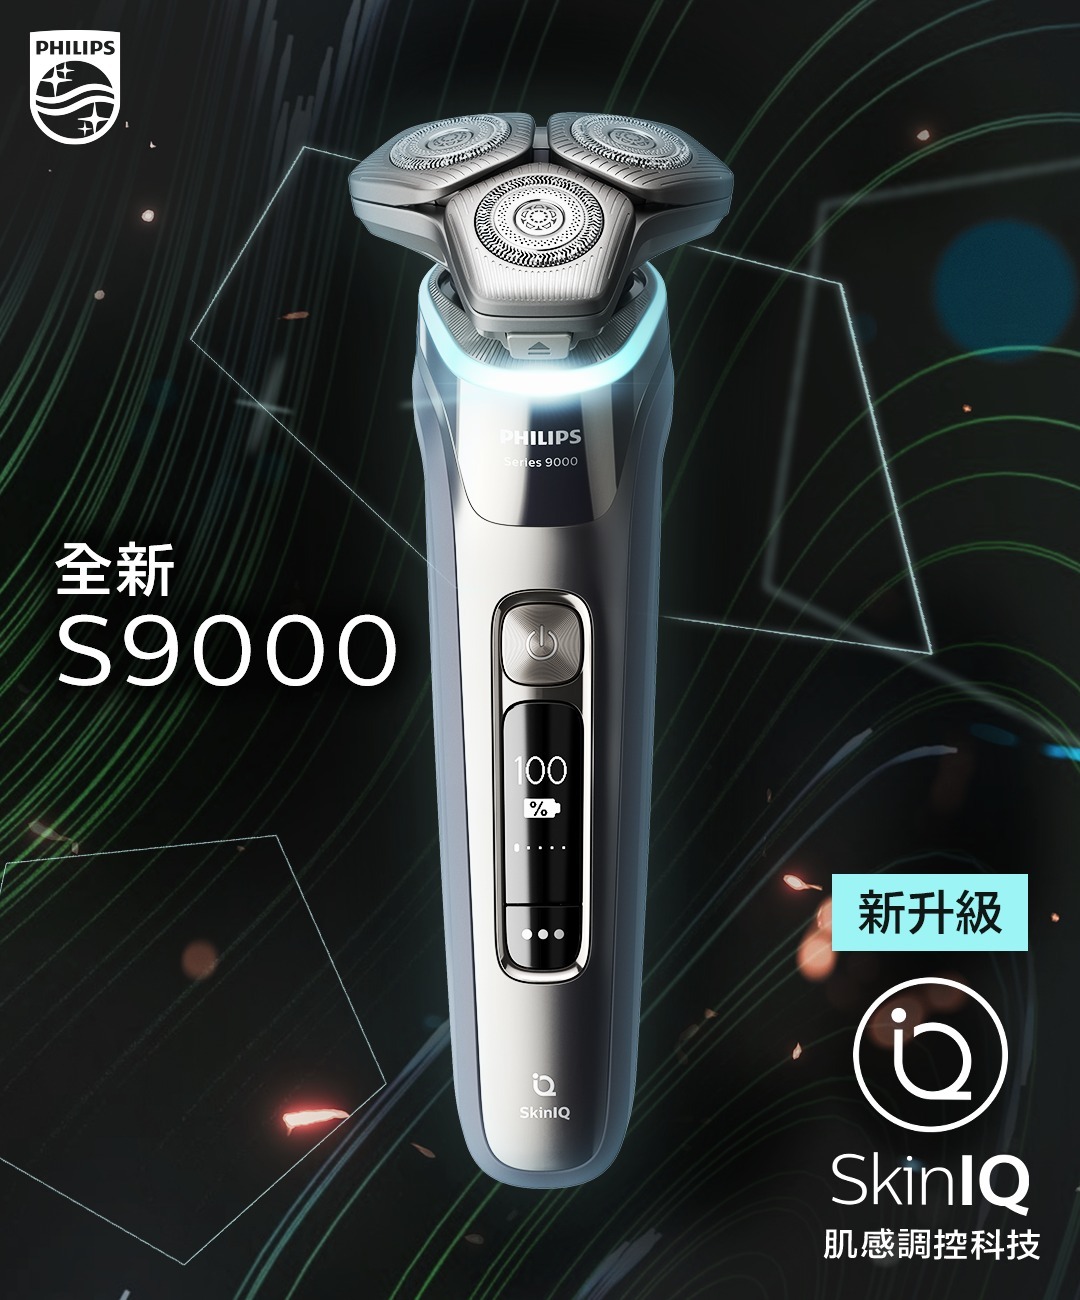 S9000 Shaver with SkinIQ technology